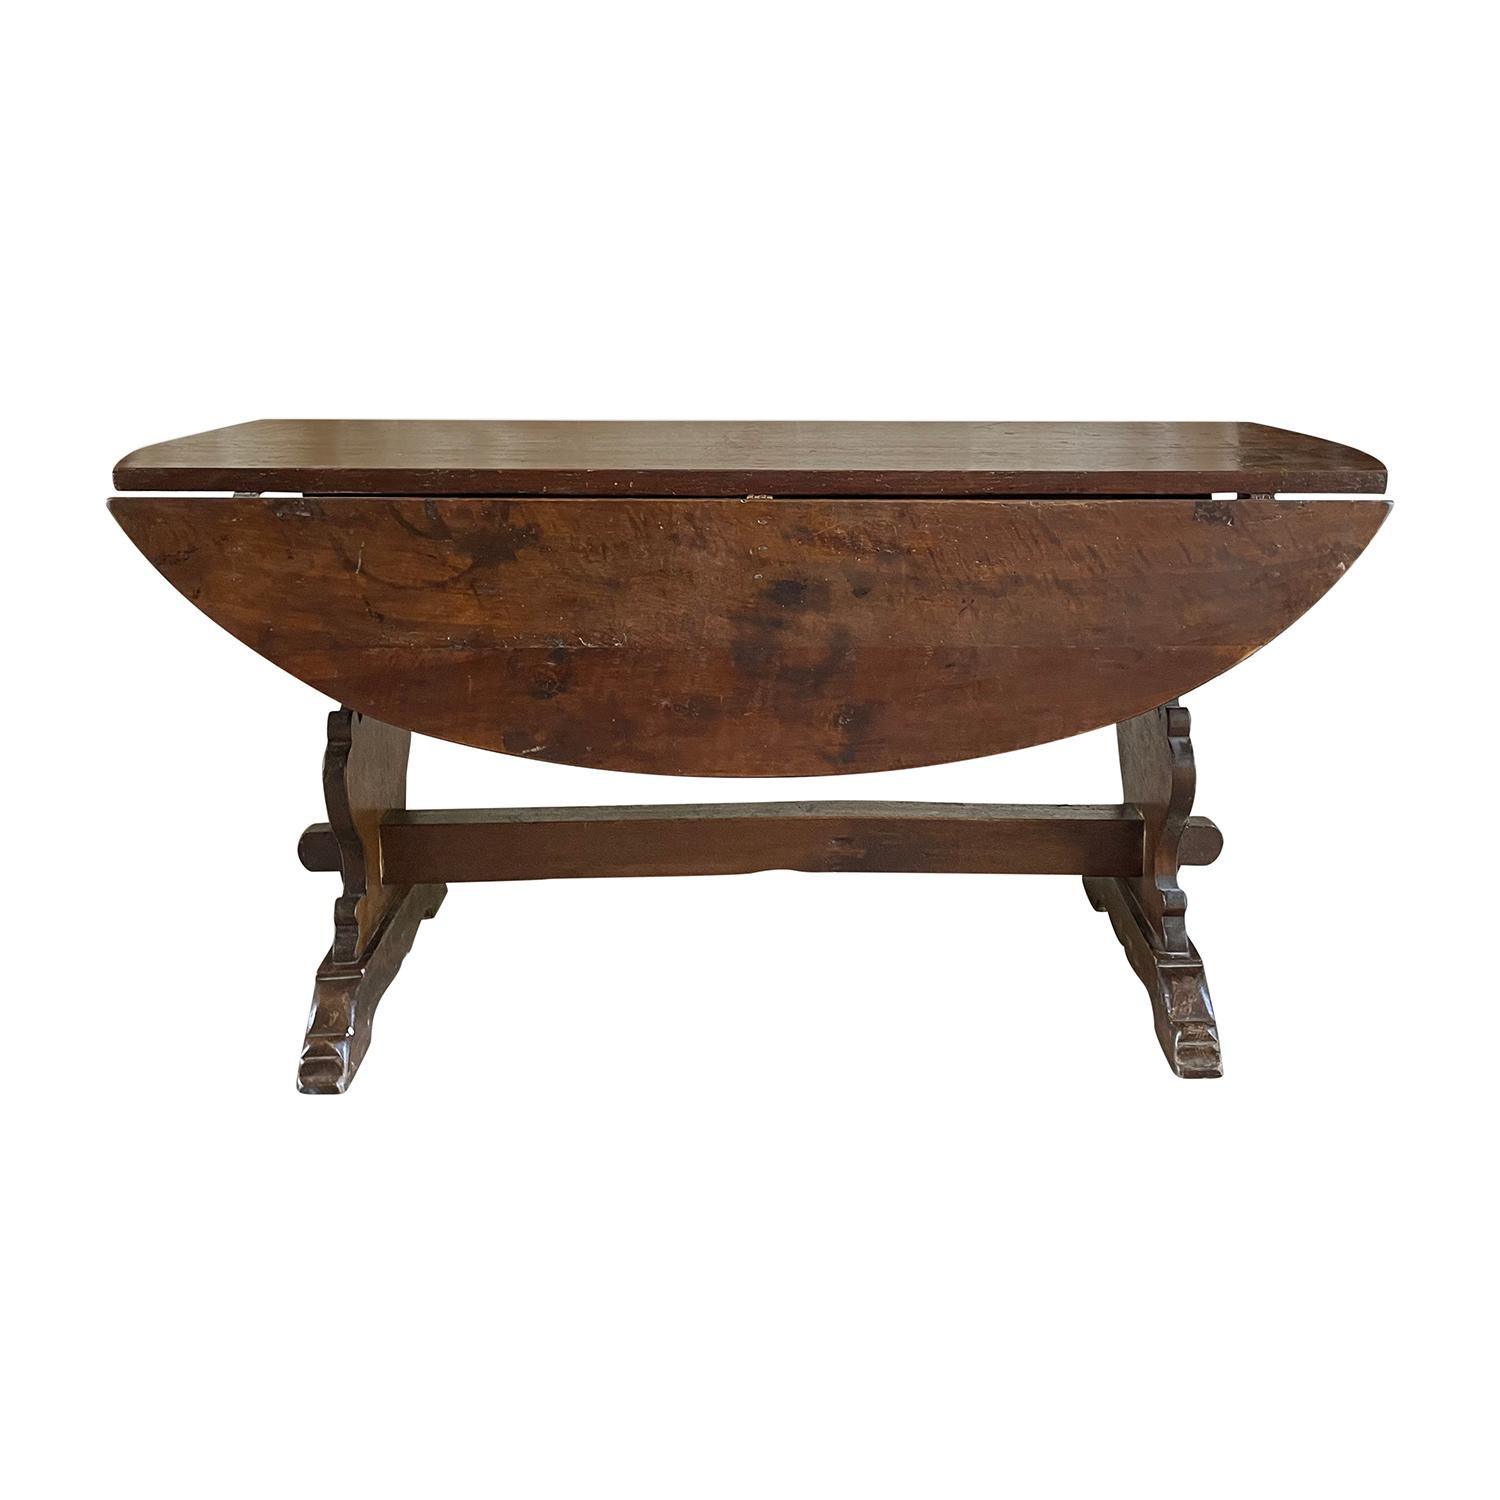 Walnut 19th Century Italian Antique Oval Drop Leaf Table, Tuscan Dining Room Table For Sale